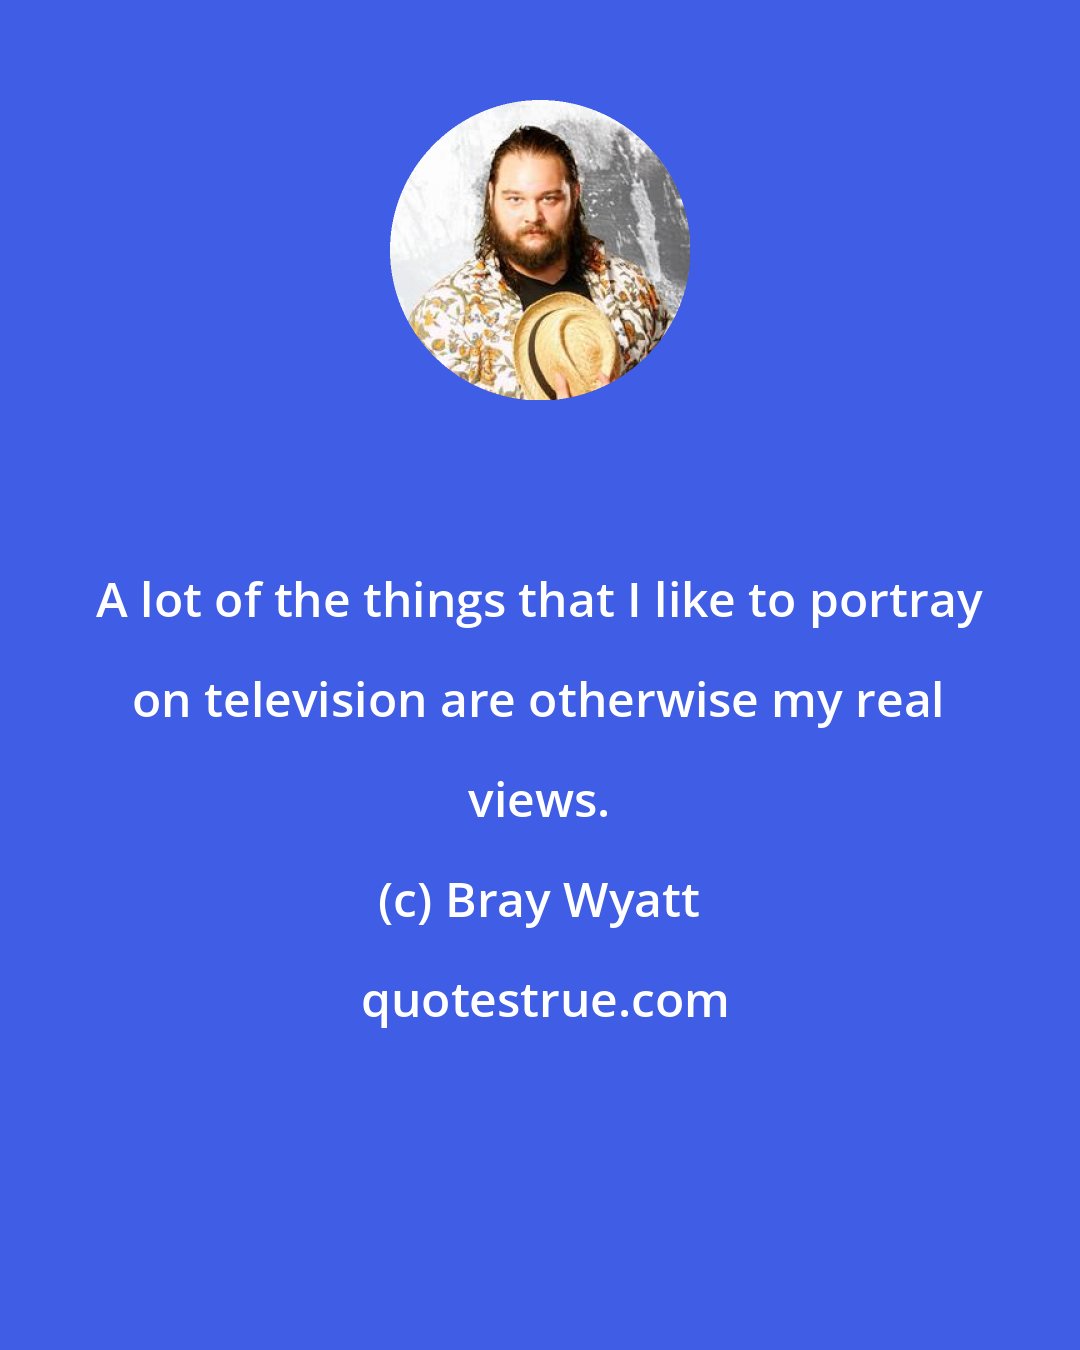 Bray Wyatt: A lot of the things that I like to portray on television are otherwise my real views.